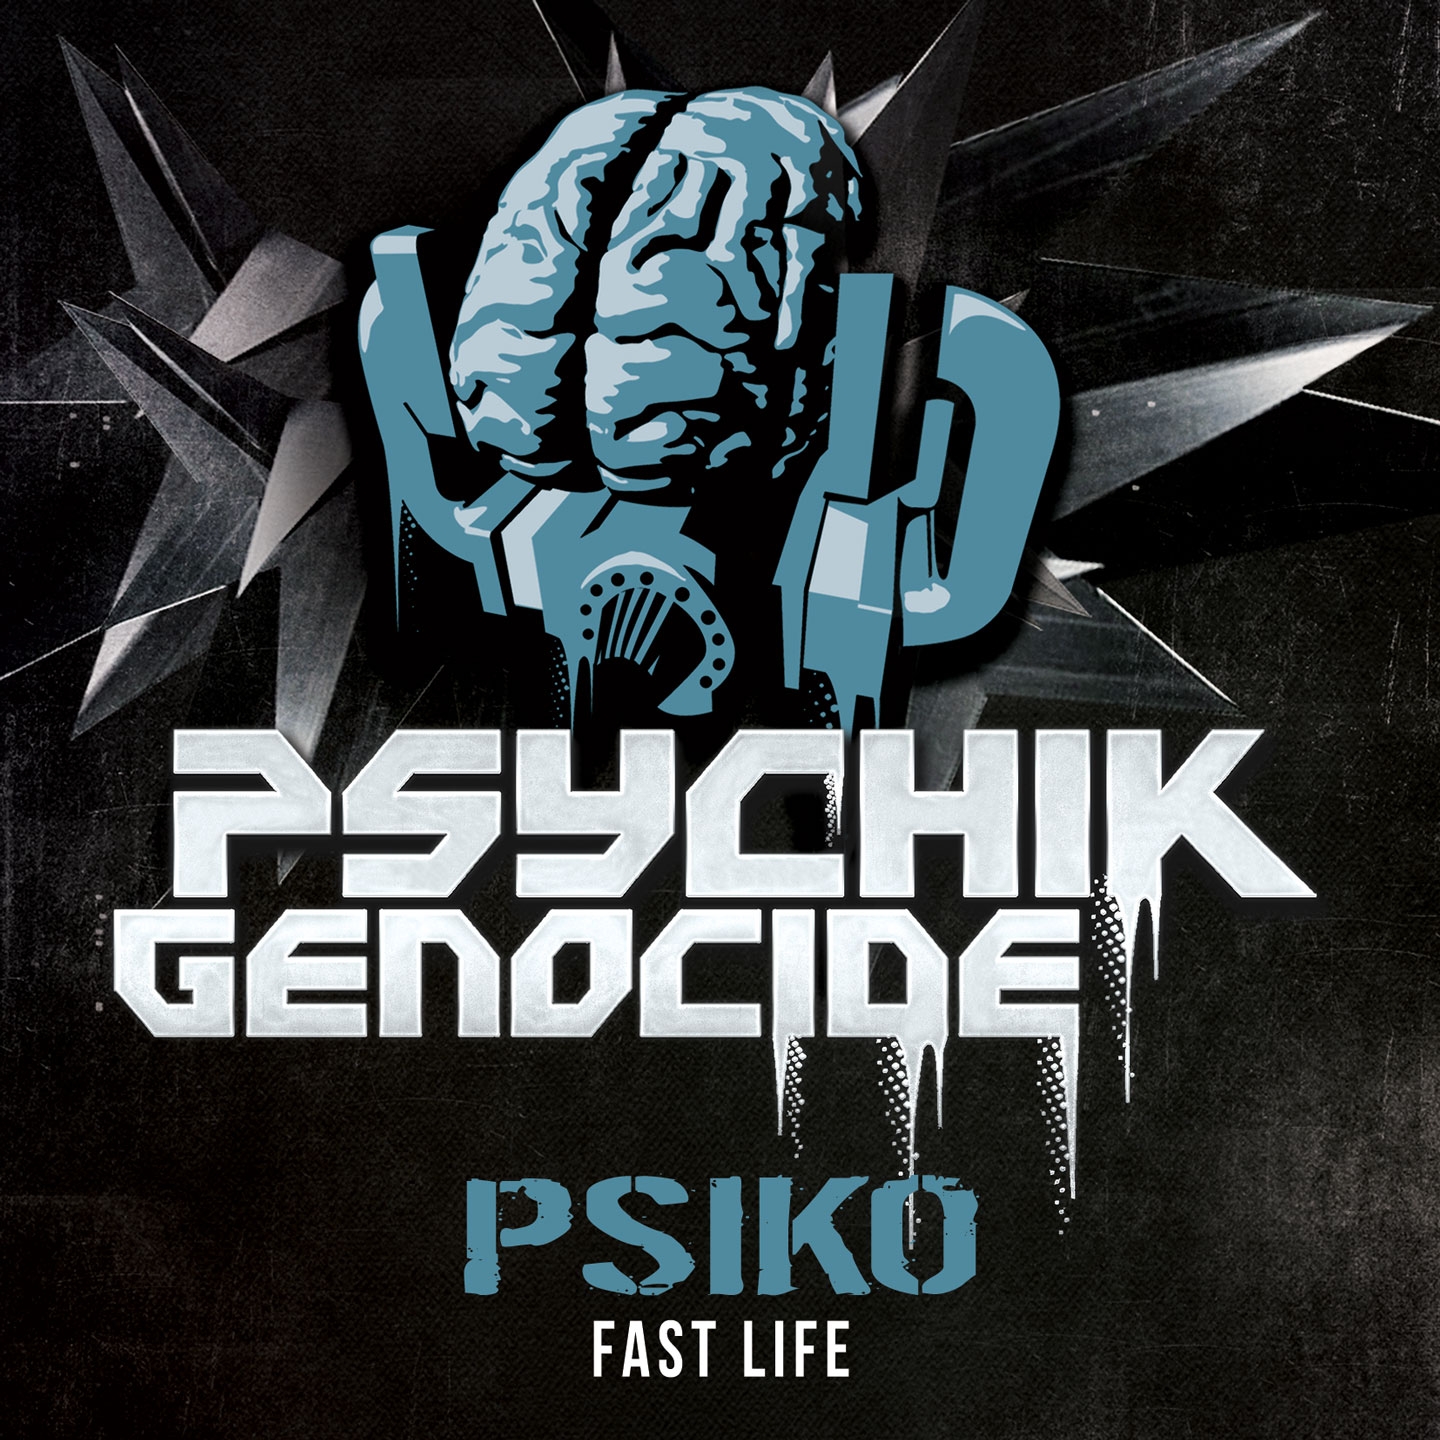 Psiko - Fast Life - MP3 and WAV downloads at Hardtunes